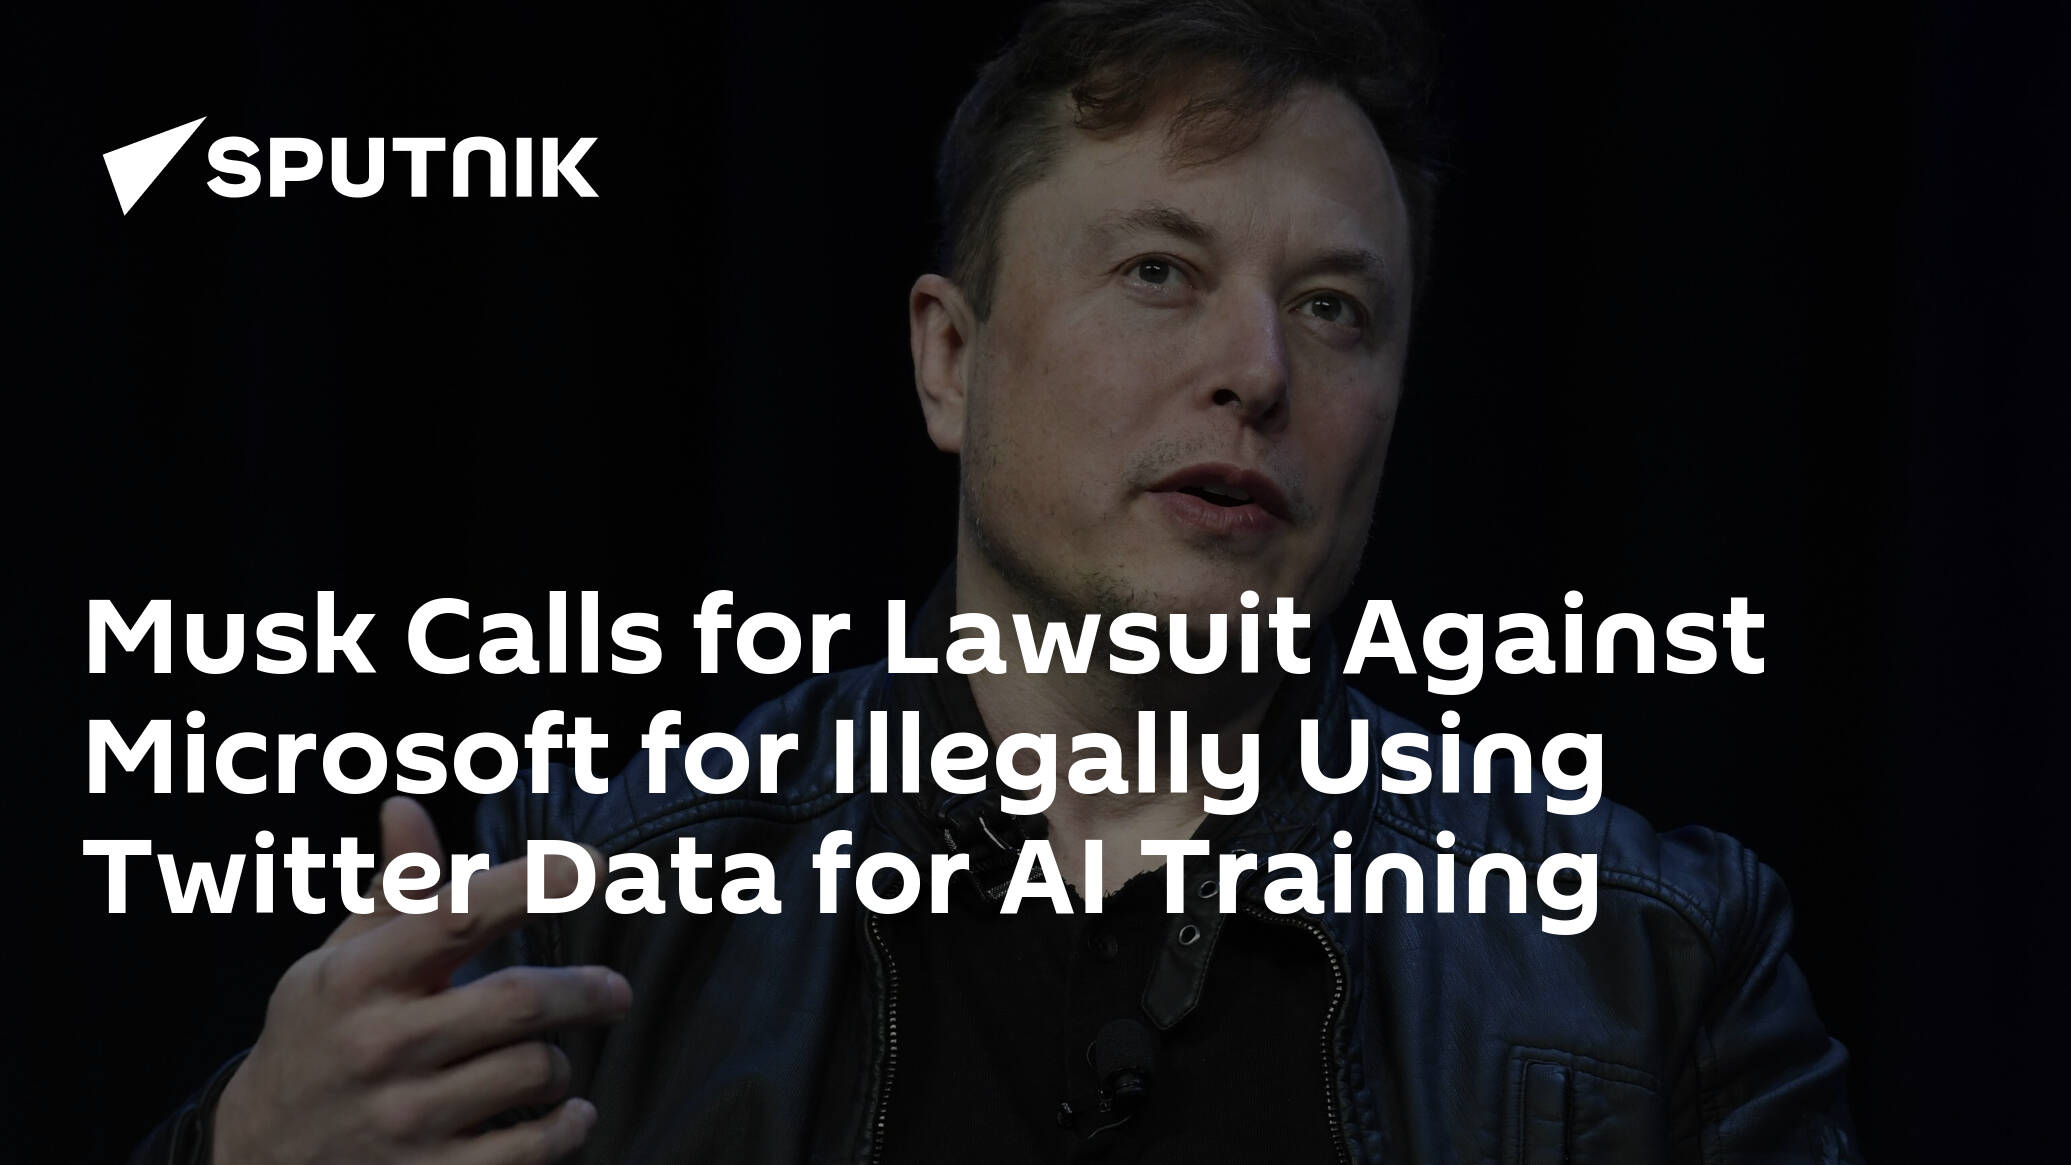 Musk Calls for Lawsuit Against Microsoft for Illegally Using Twitter Data for AI Training